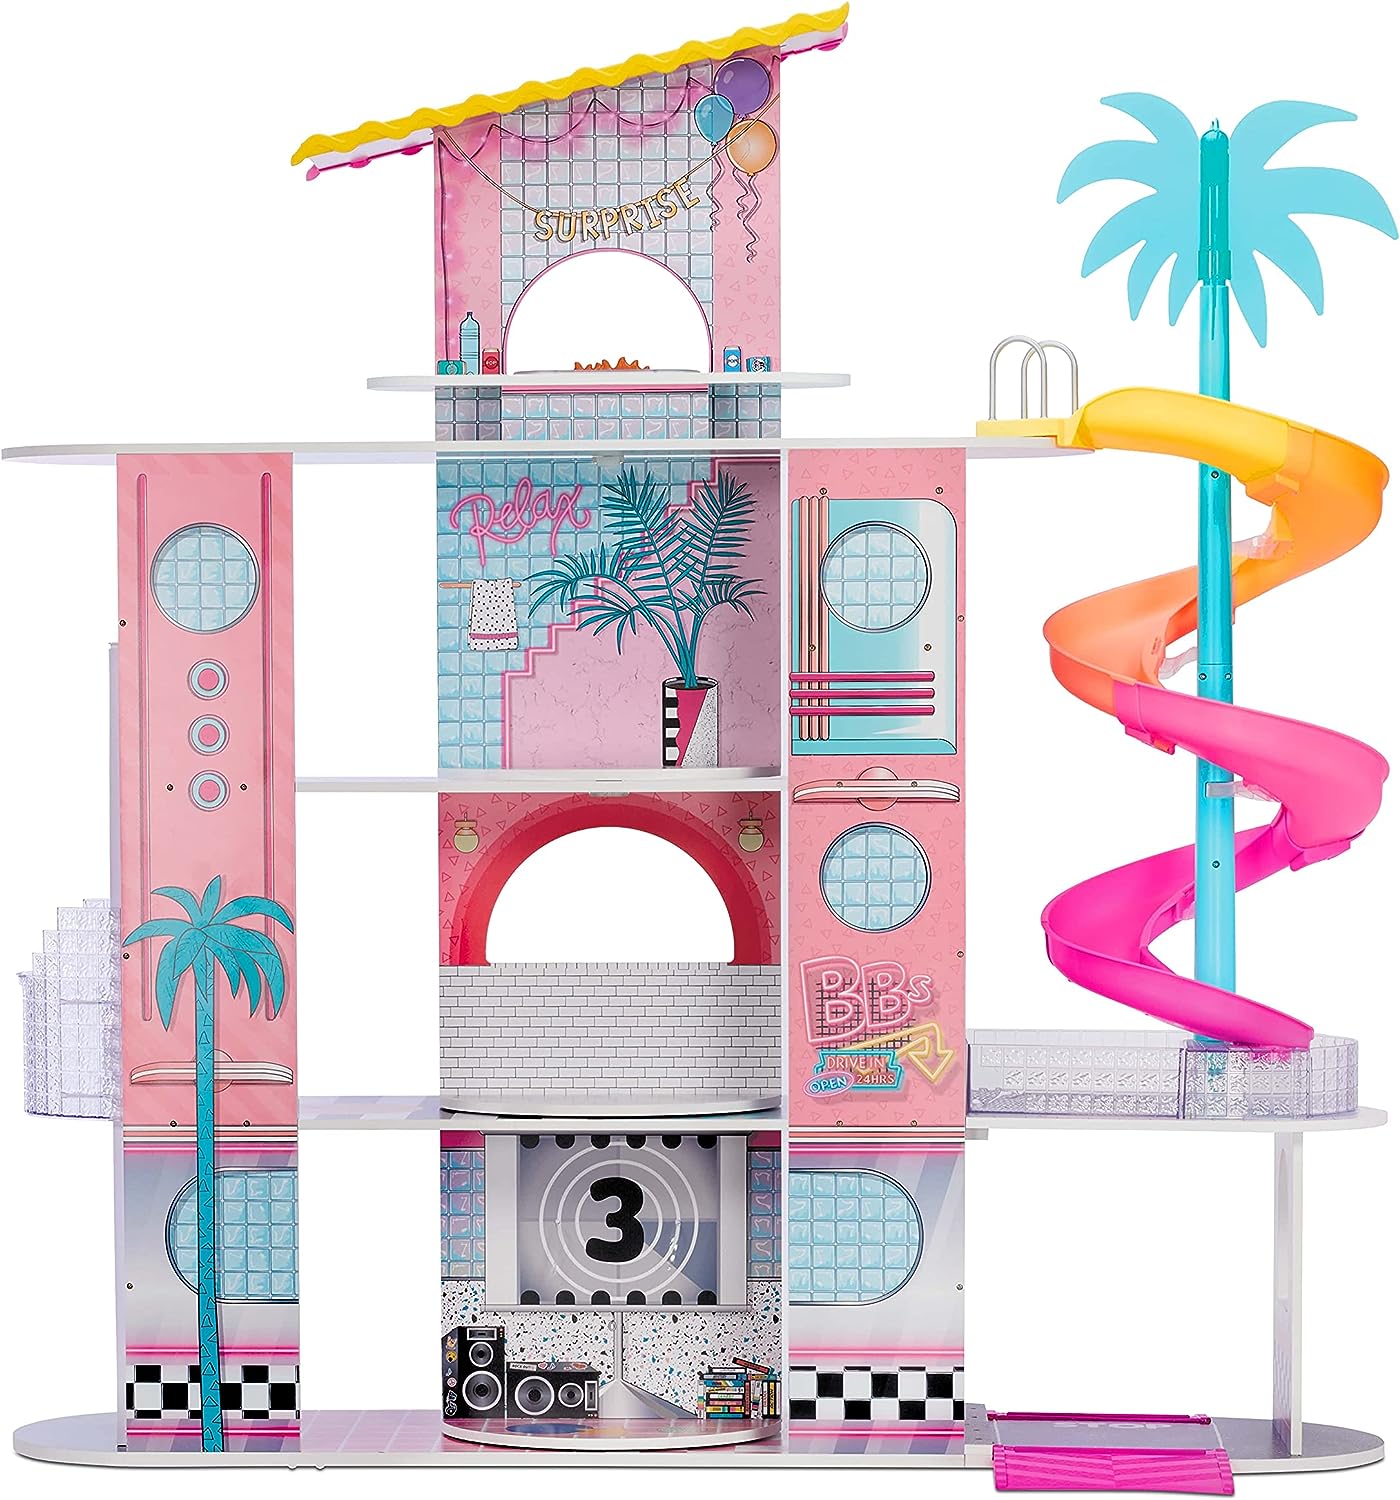 L.O.L. Surprise! OMG House of Surprises – Real Wood Dollhouse with 85+ Surprises, 4 Floors, 10 Rooms, Elevator, Spiral Slide, Pool, Movie Theater Drive Thru, Rooftop- Toy Gift for Girls Ages 4 5 6 7+